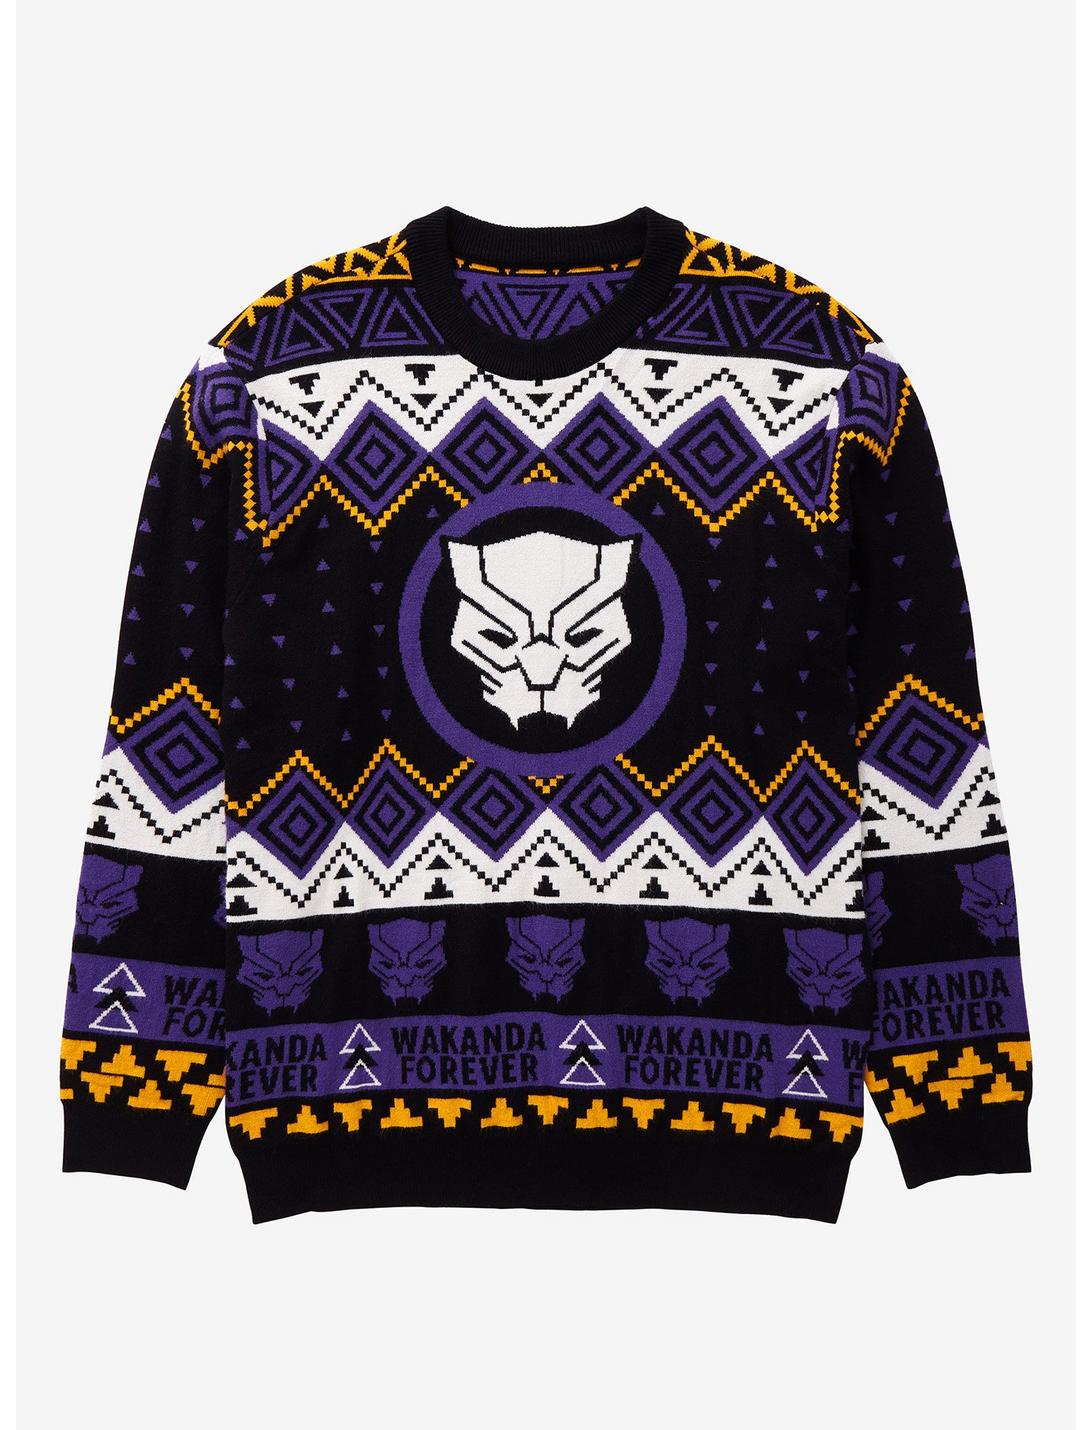 Marvel Black Panther Wakanda Forever Holiday Sweater - BoxLunch Exclusive, MULTI, hi-res